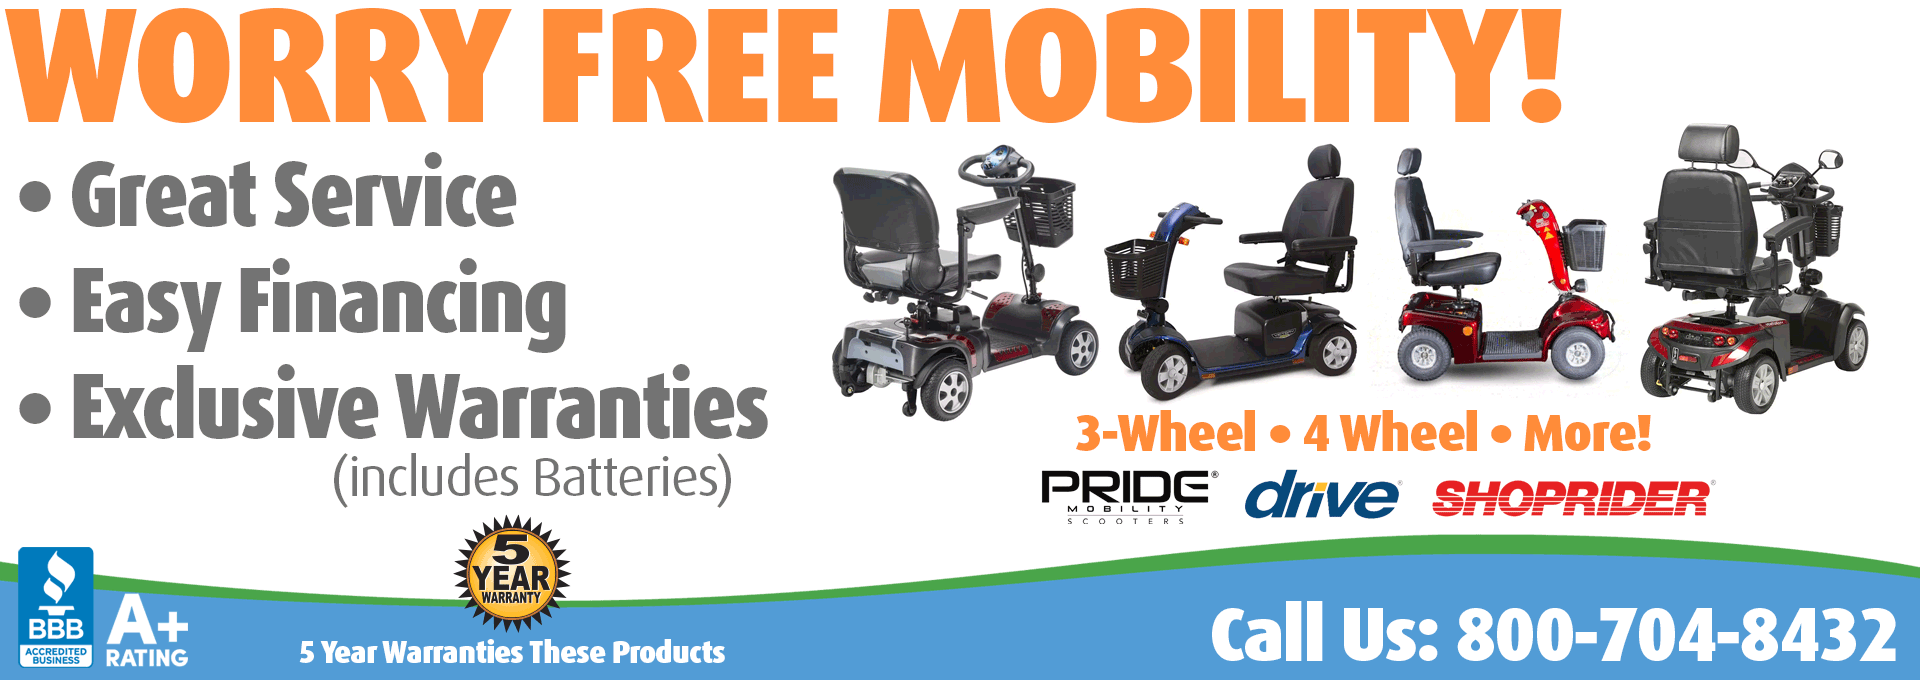 Living Well Stores: Standard Sized Mobility Scooters with "Worry Free" Warranties featuring Drive Medical, Pride Mobility, Shoprider and More.